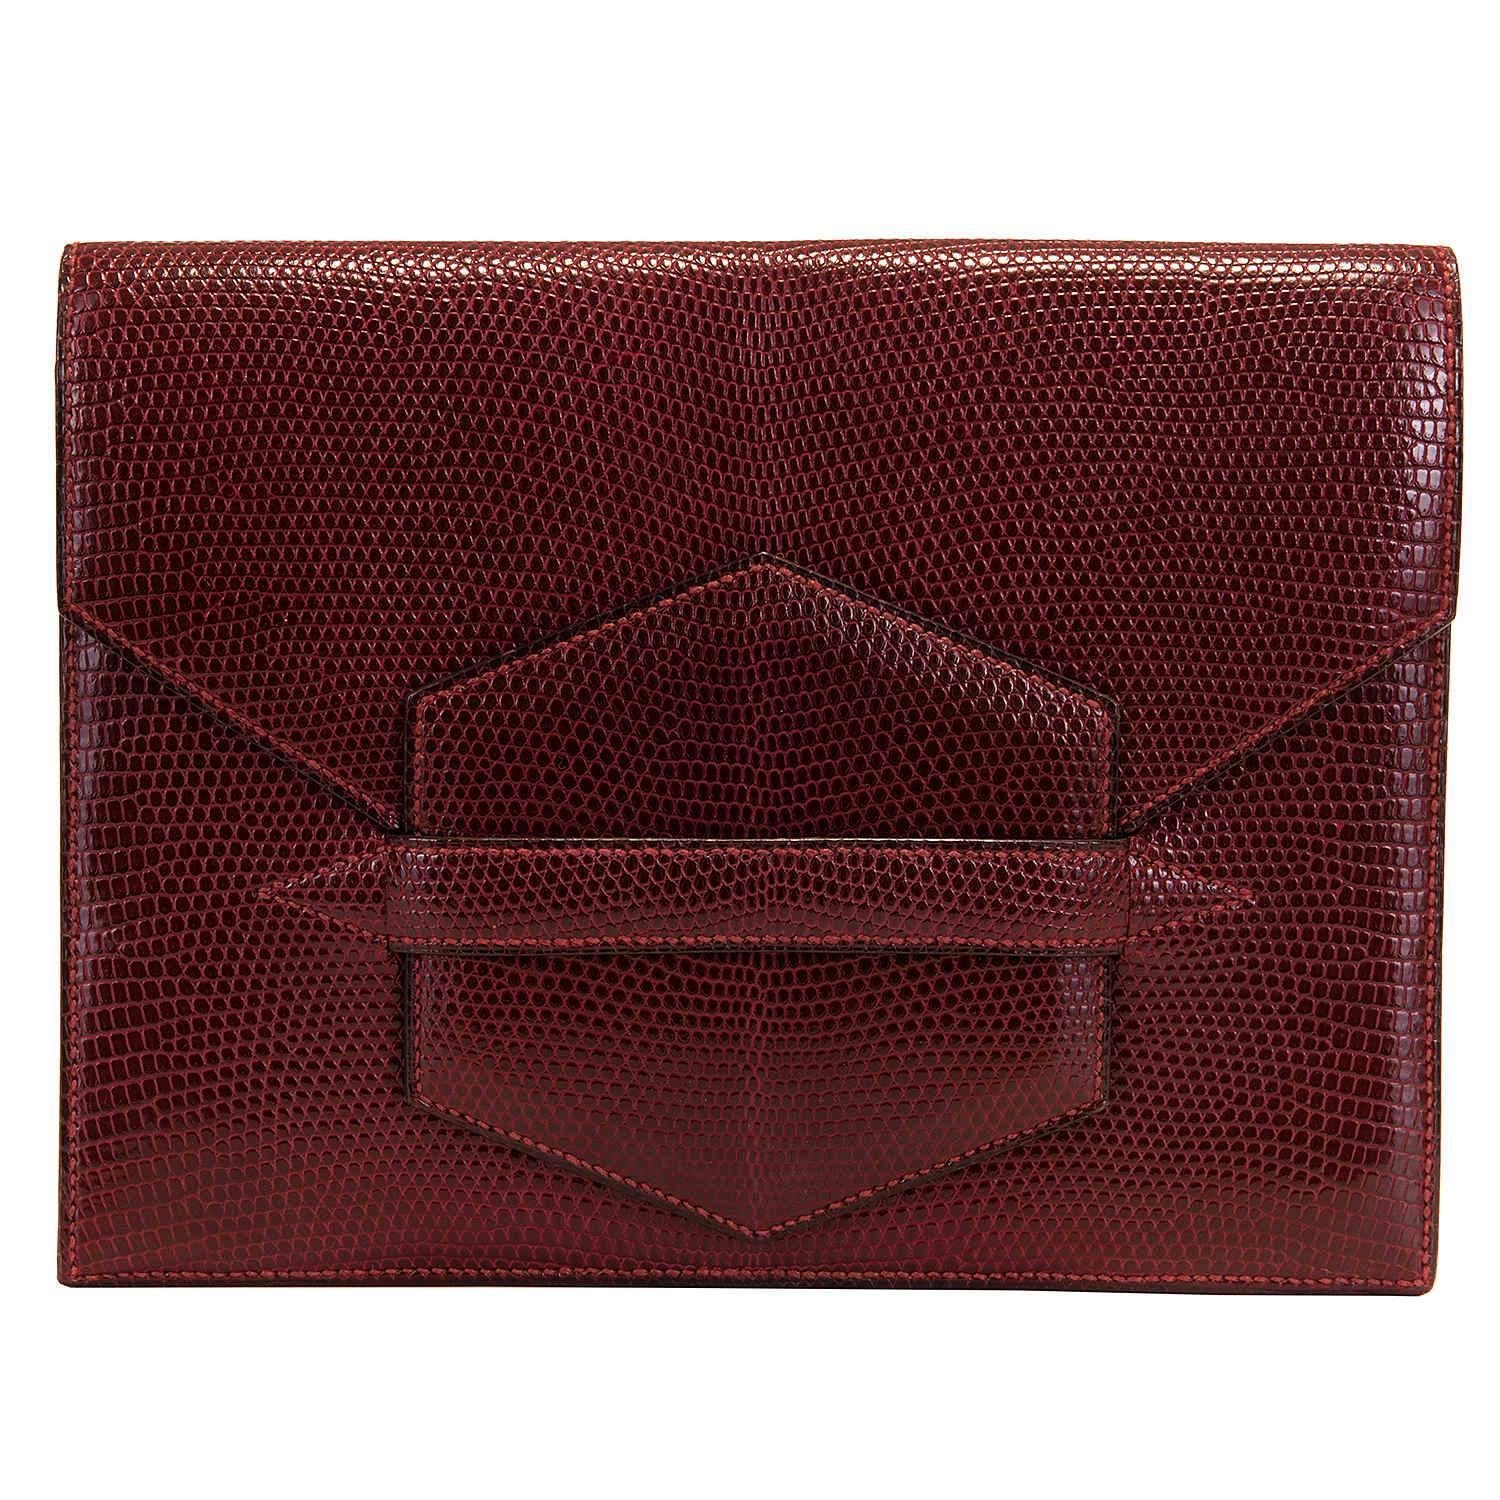 A Very Elegant Rare Vintage Hermes 'Faco' Clutch bag. Finished in Burgundy Lizard, this special order bag is in absolutely pristine condition throughout, with the interior in a matching lambskin and fitted with three individual pockets and a